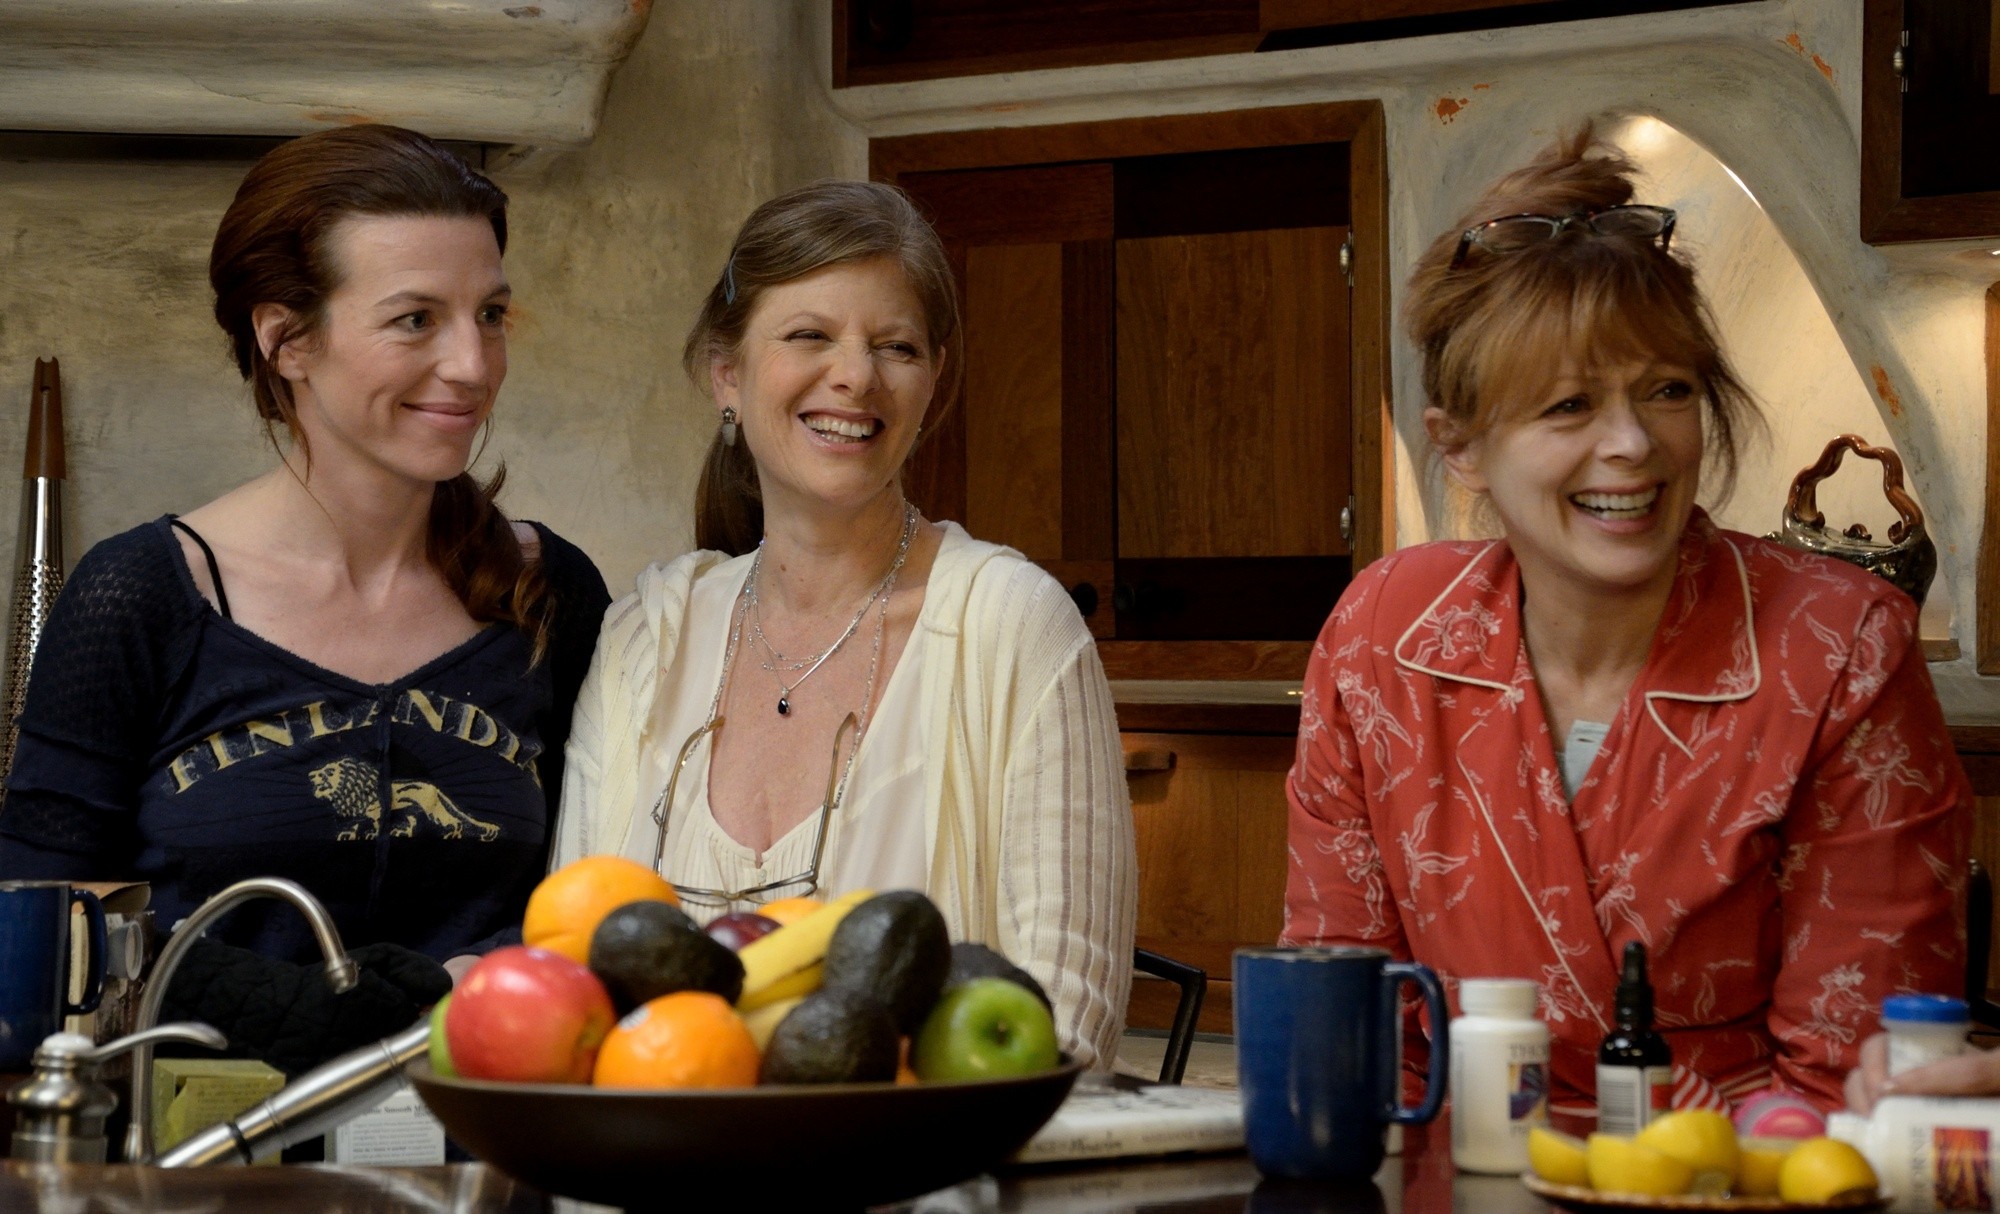 Tanna Frederick, Eliza Roberts and Frances Fisher in A Rainbow Film's The M Word (2014)